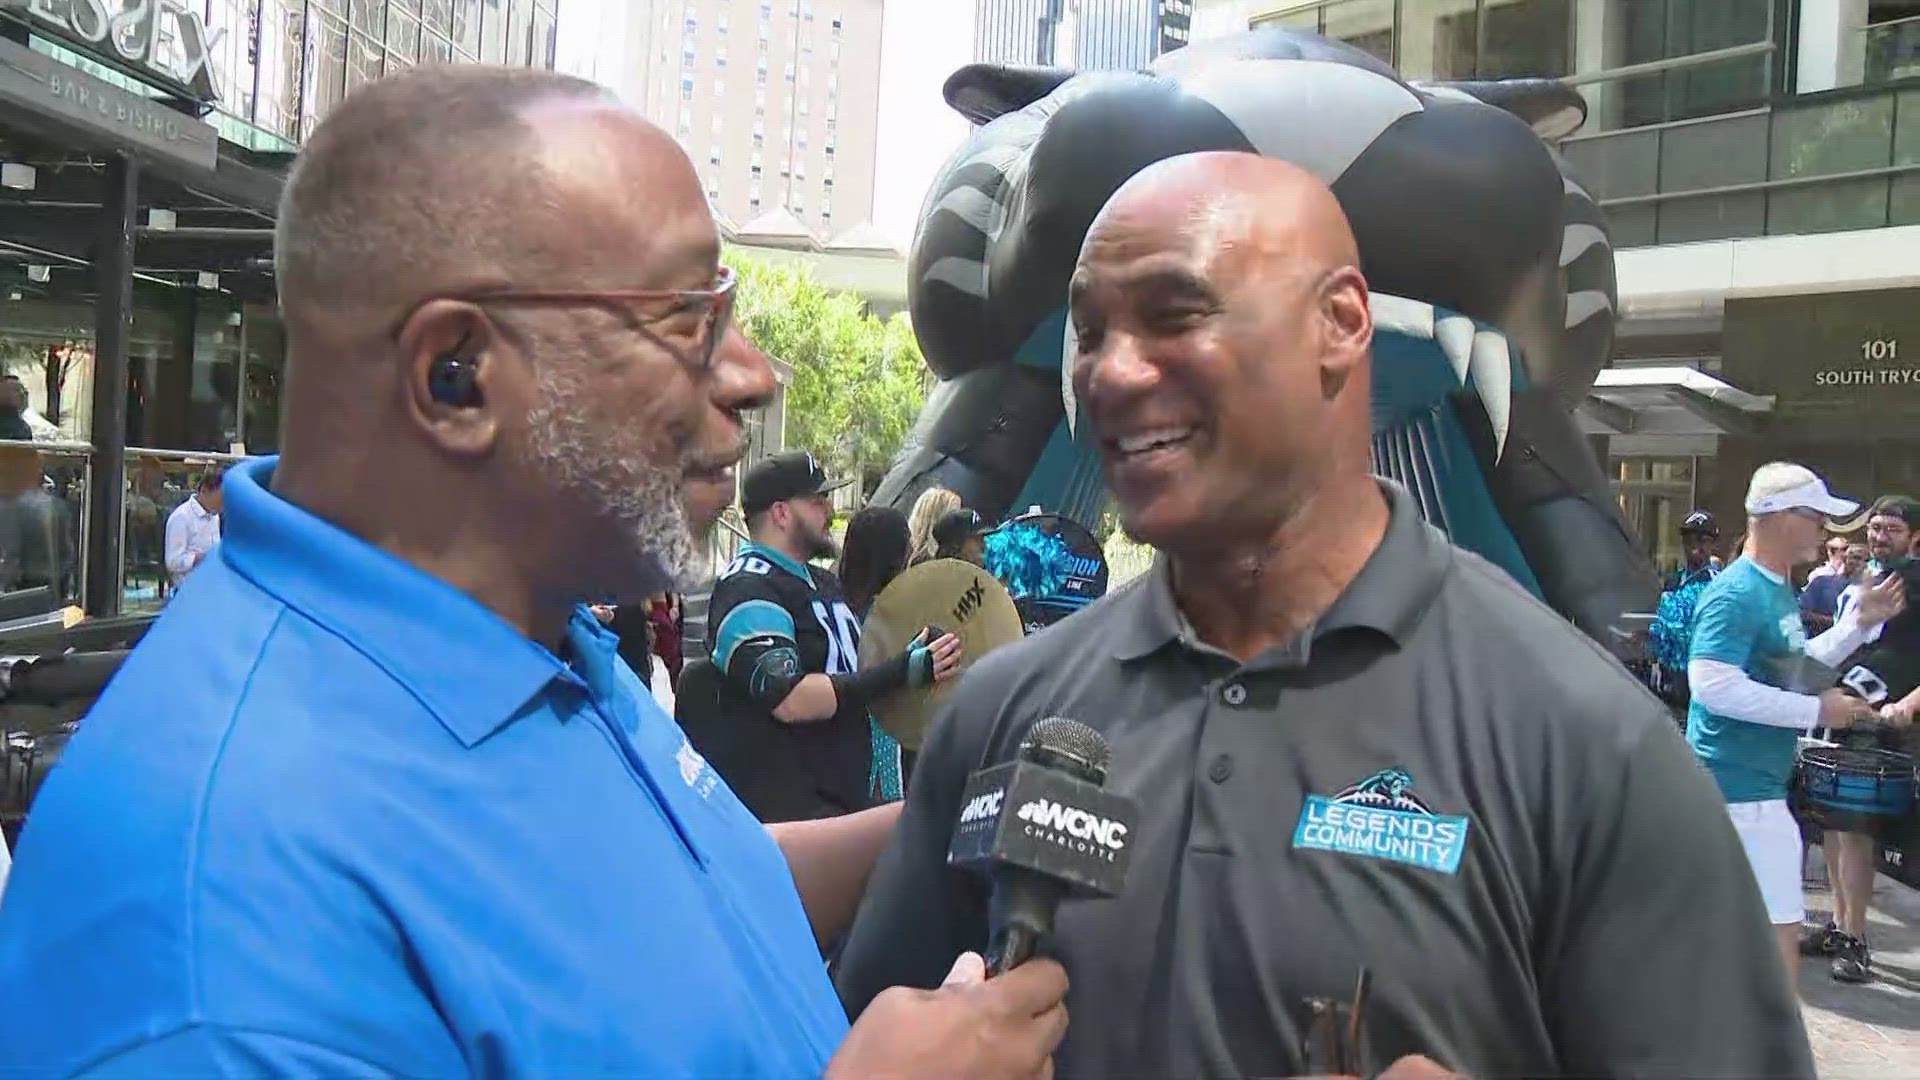 Panthers fans gathered in Uptown Thursday to meet players ahead of Sunday's Week 1 matchup vs. the Atlanta Falcons.